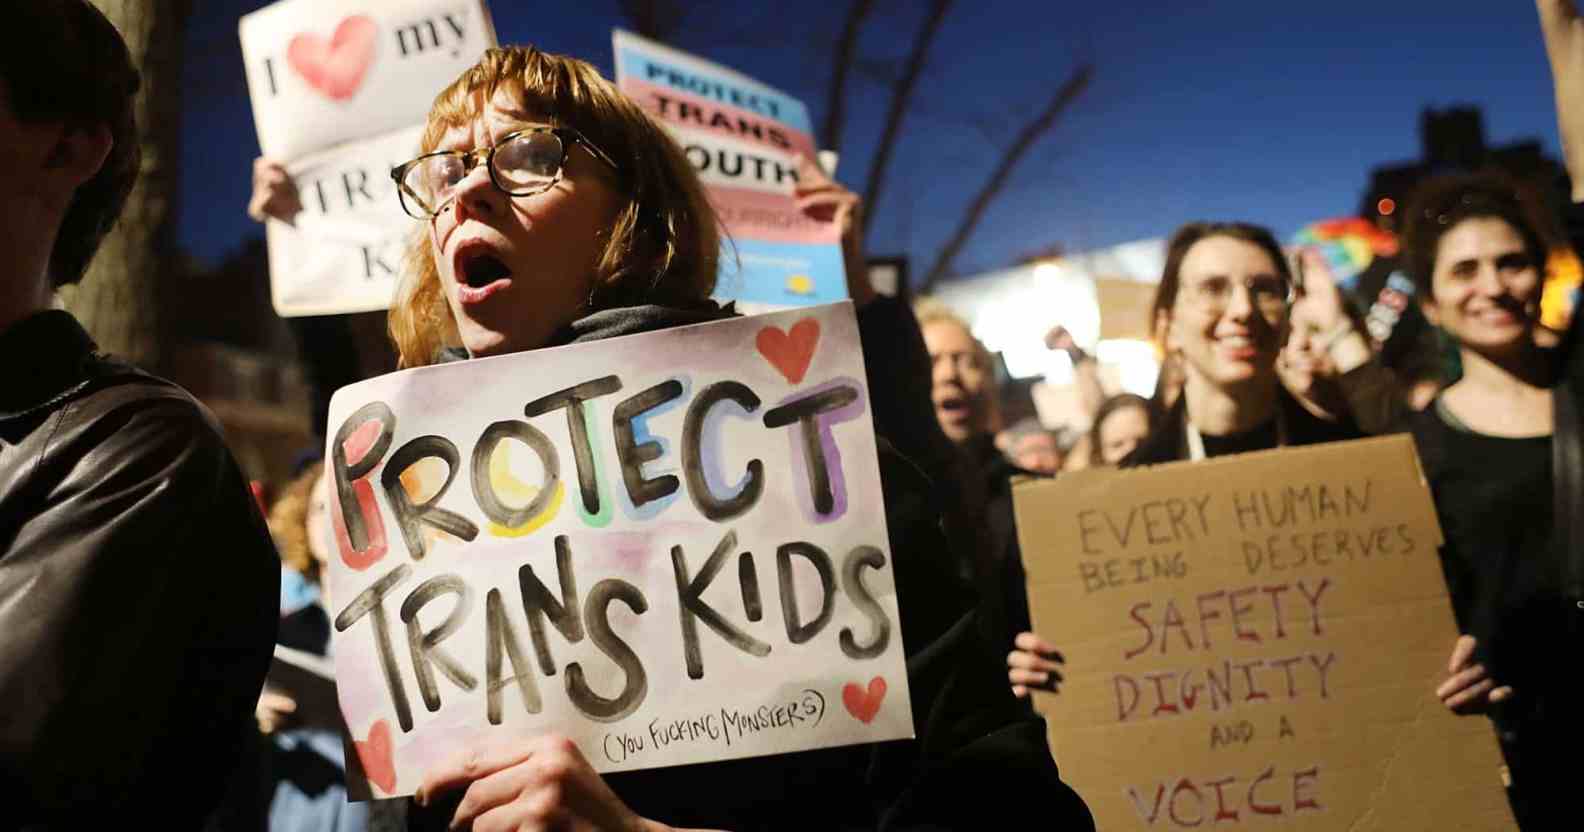 A person in gather amid a crowd in a protest holding a sign that reads 'Protect trans kids'